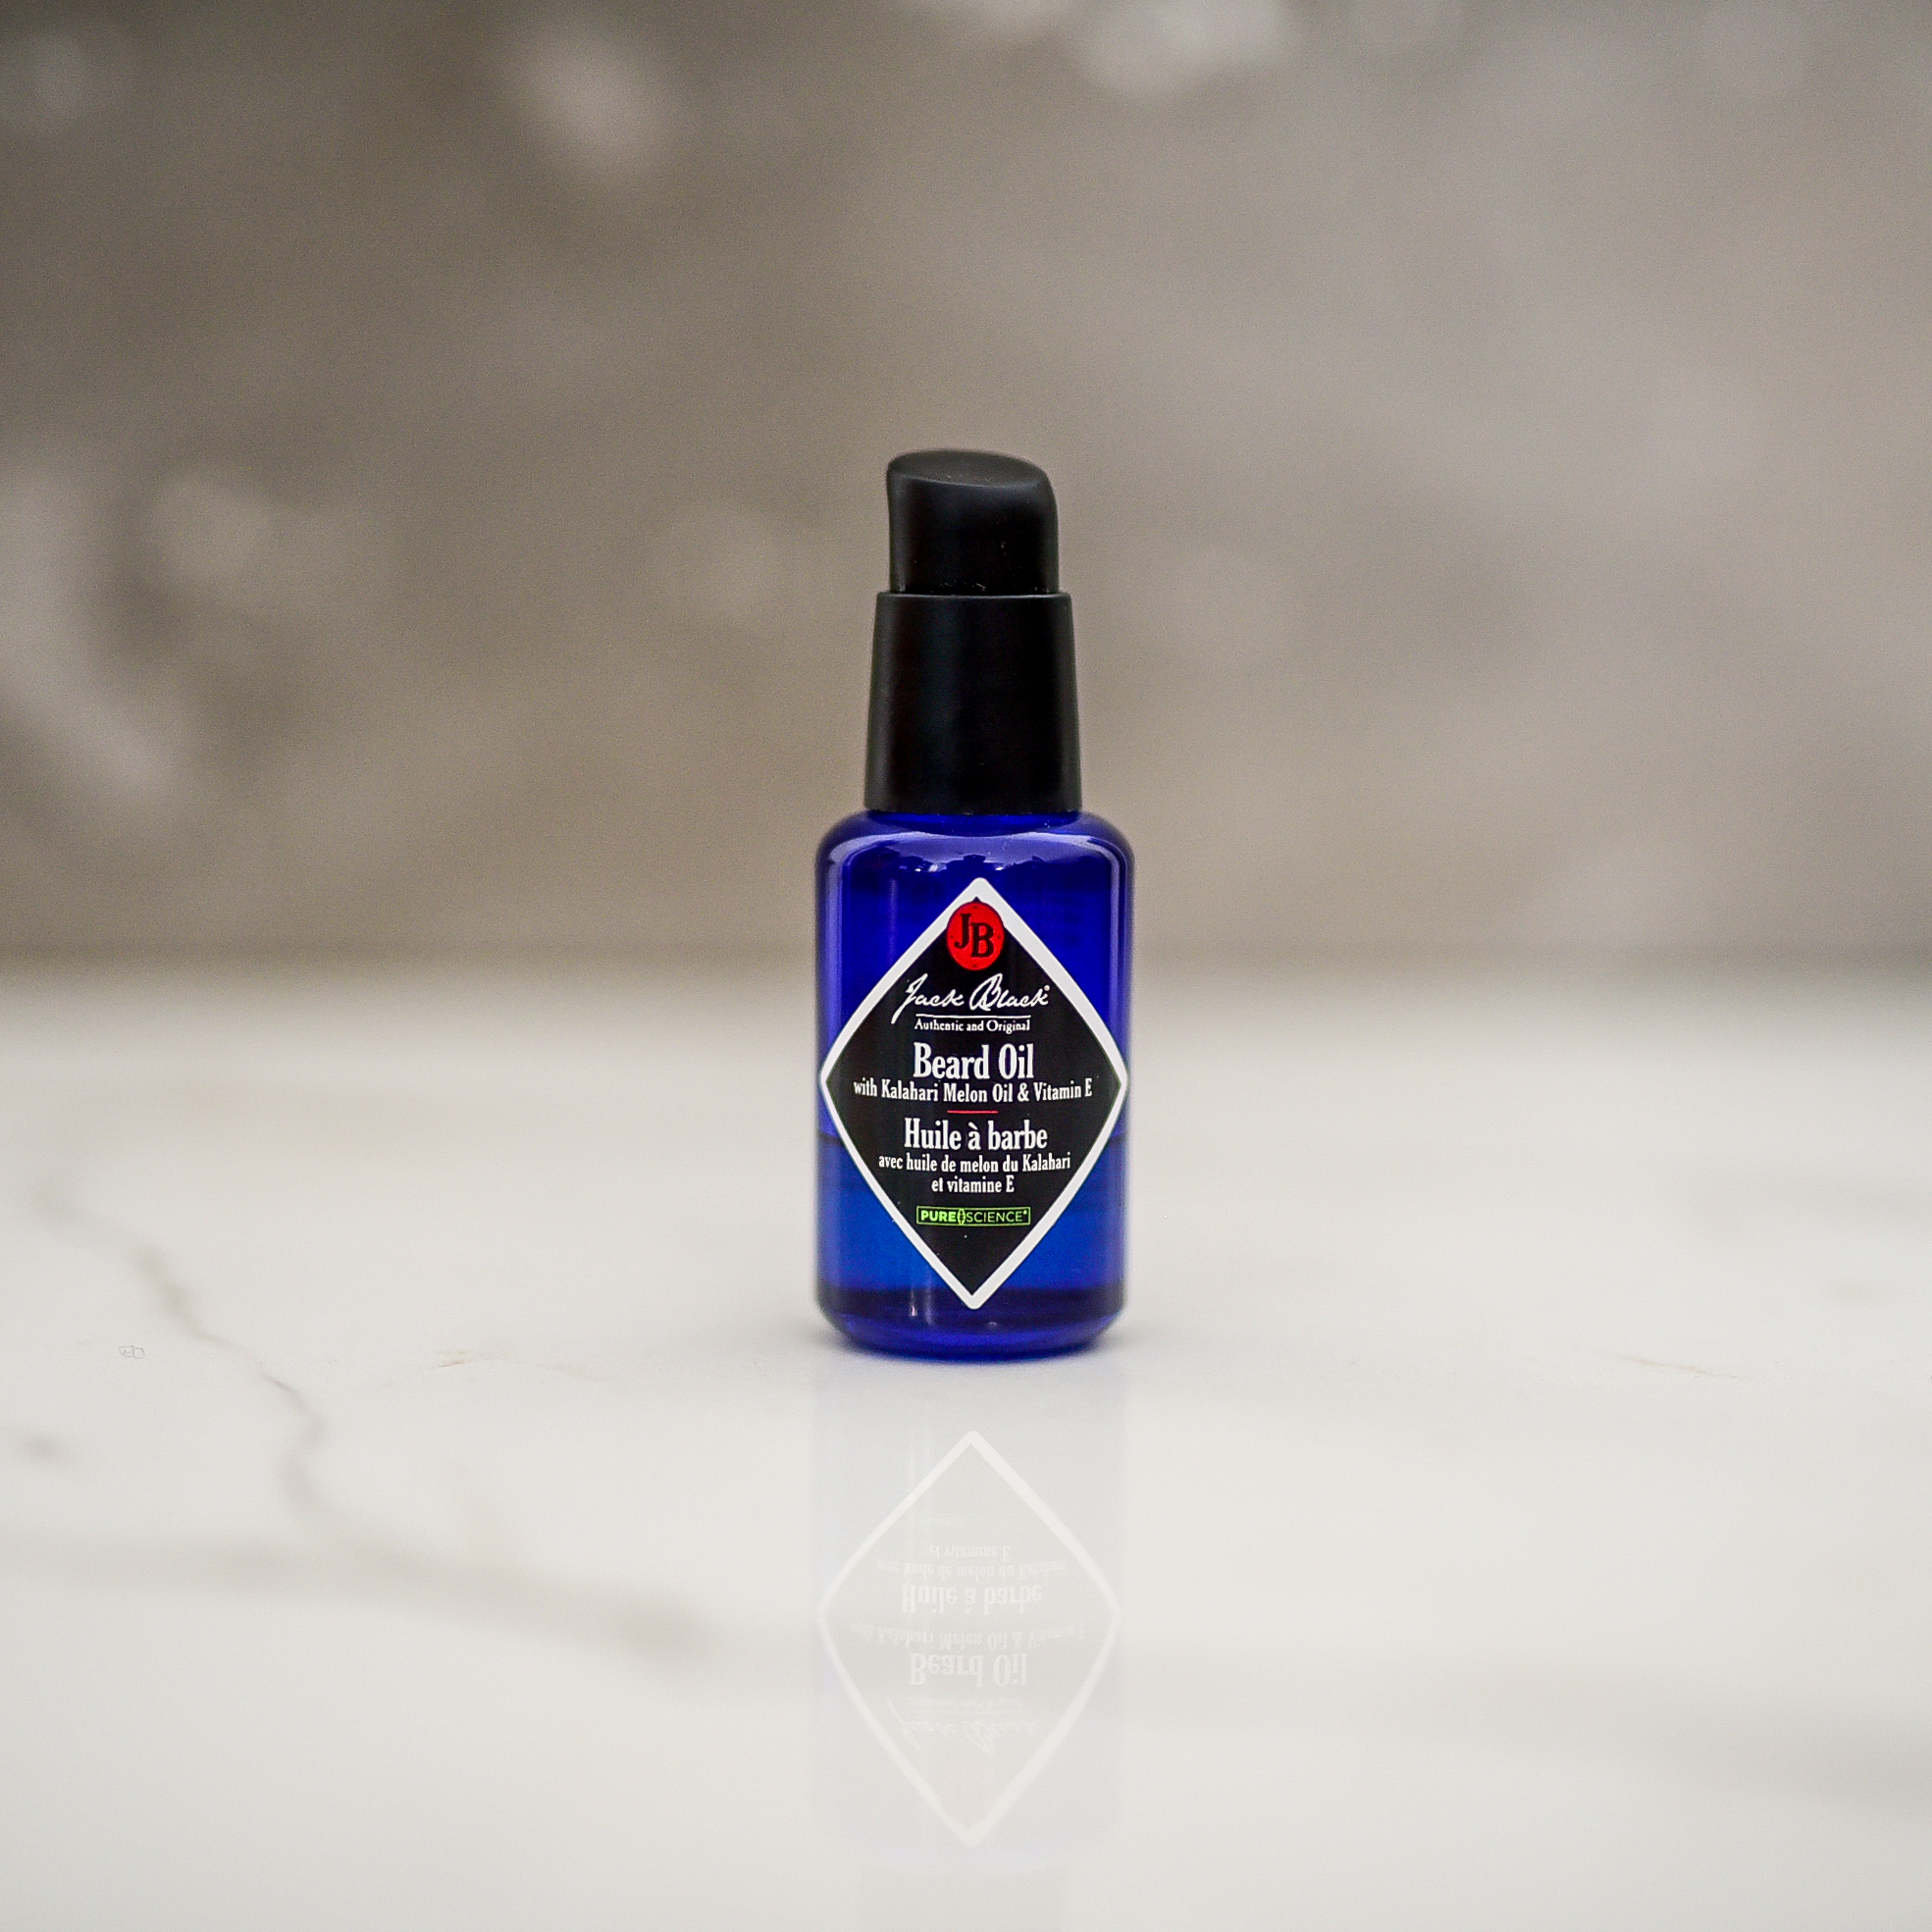 For the bearded men in your life, this beard oil is everything! So smooth, light scent and gets the beard shiny yet not sticky - GROOMING GIFT IDEAS - THE ULTIMATE GIFT LIST FOR MODERN MEN 